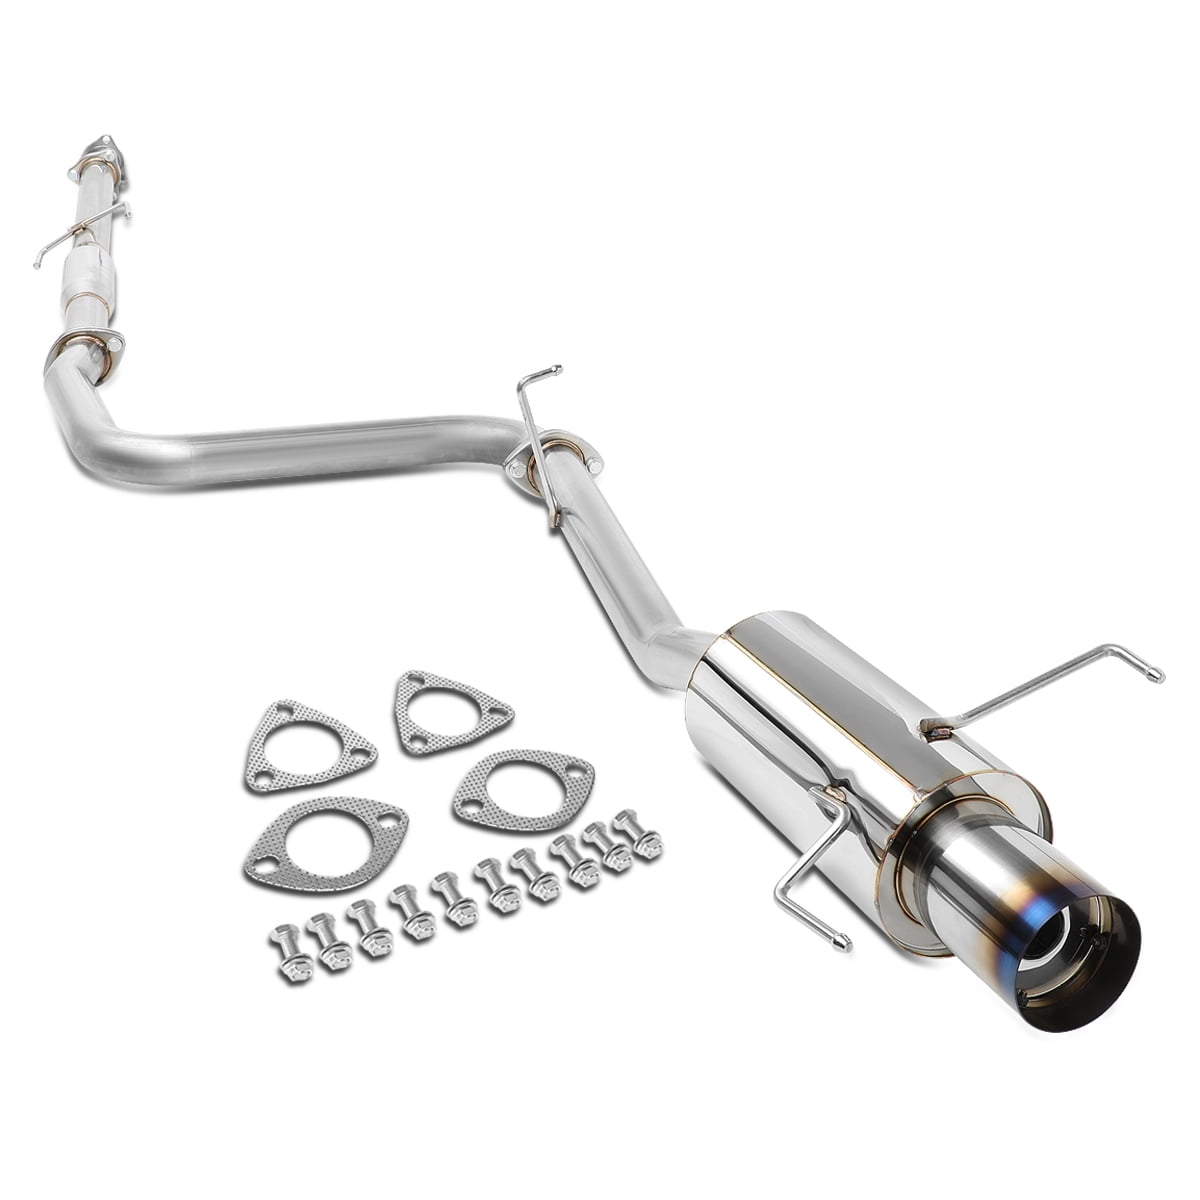 AJP Distributors 2.25 To 2.5 Catback Exhaust Muffler System Performance Racing Stainless Steel For Honda Prelude 1992 1993 1994 1995 1996 92 93 94 95 96 